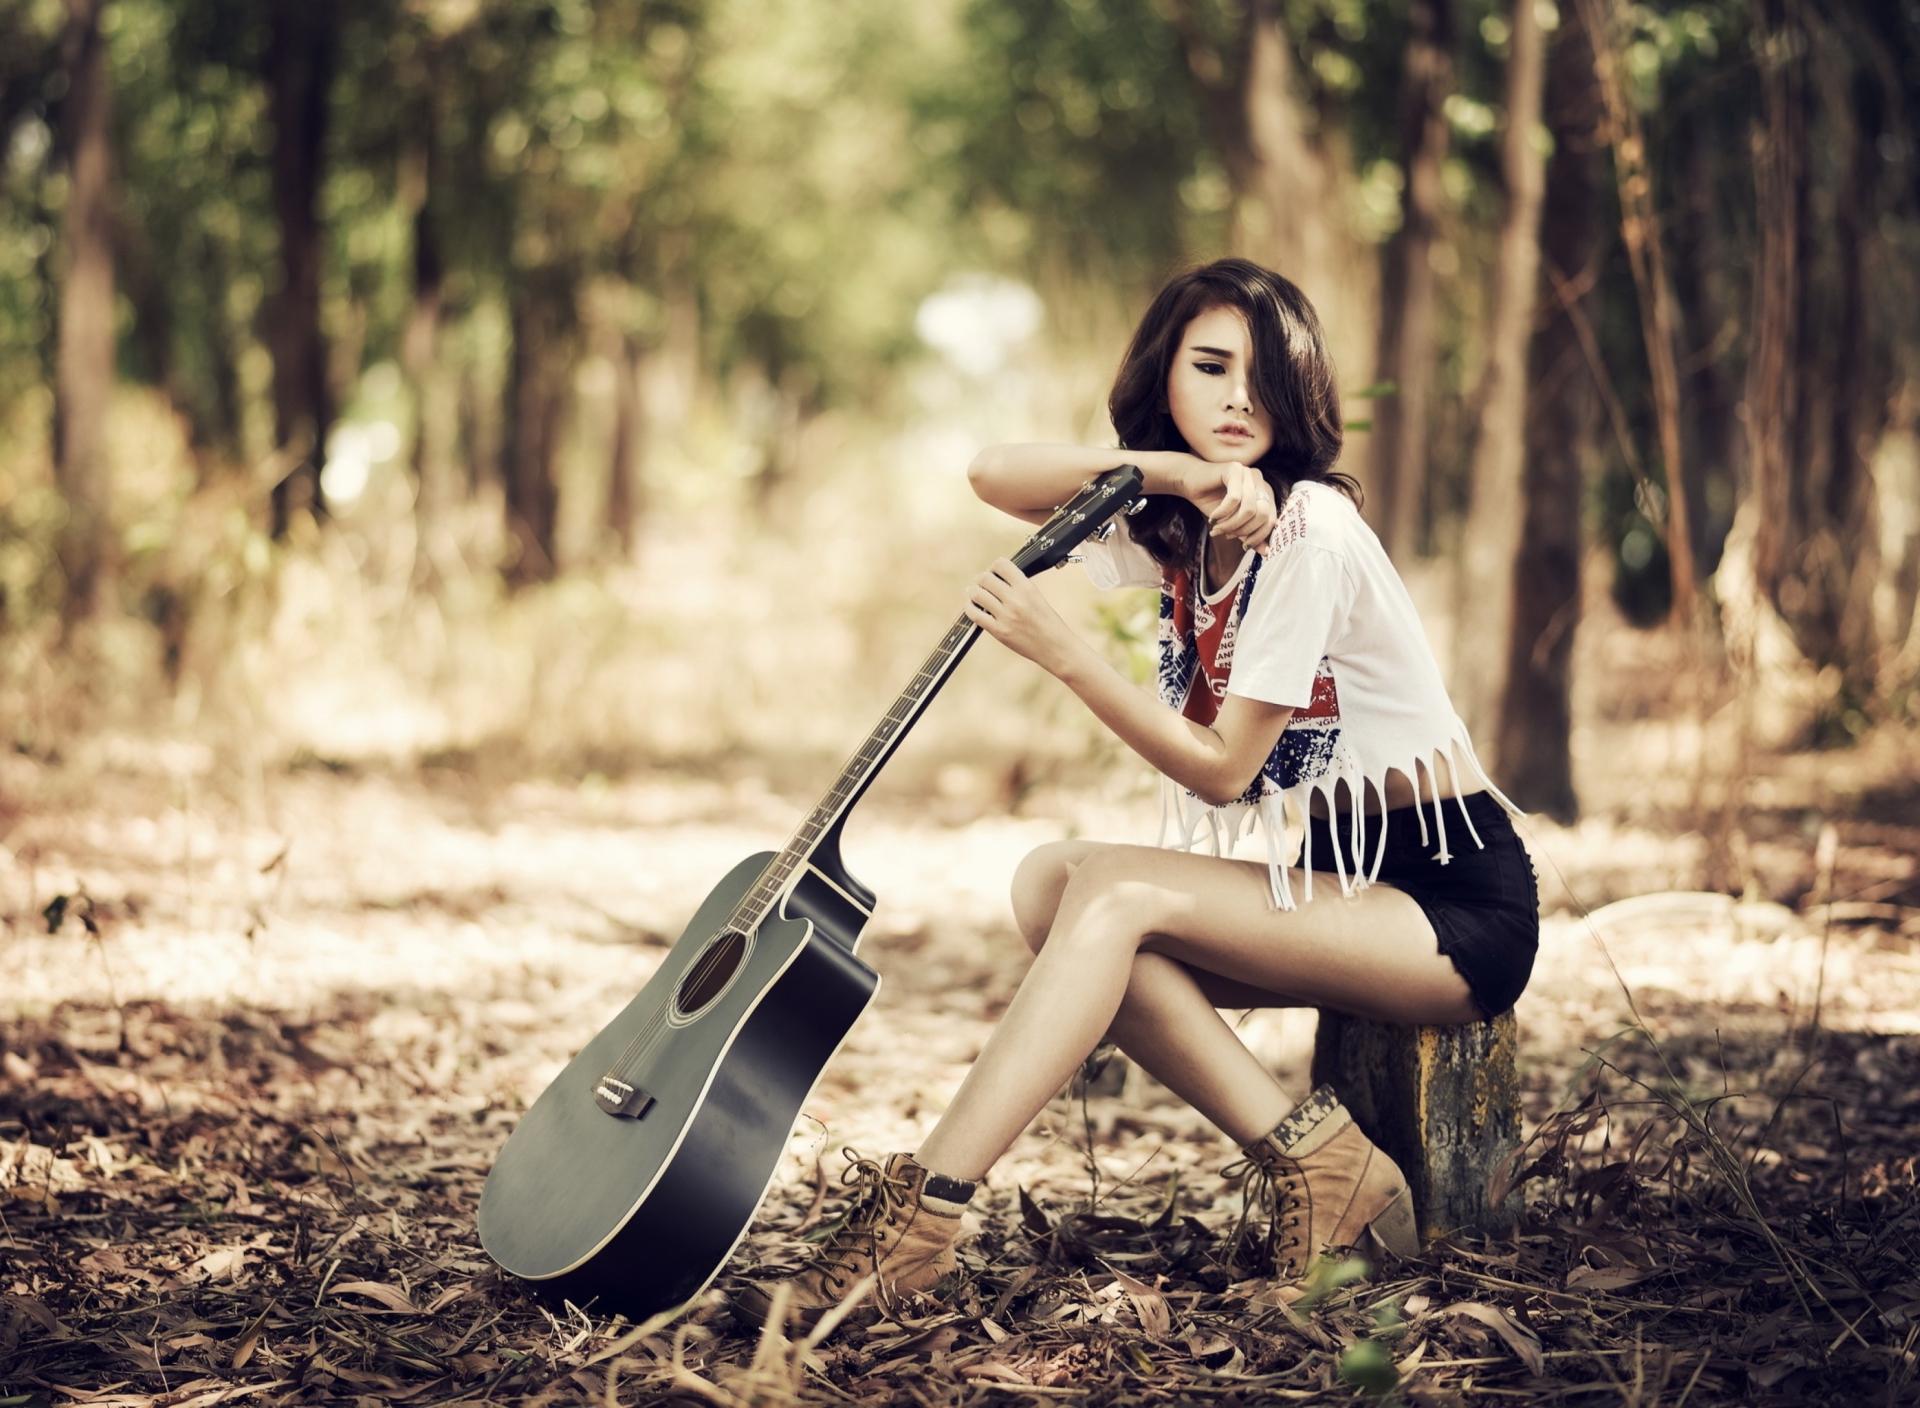 Das Pretty Brunette Model With Guitar At Meadow Wallpaper 1920x1408